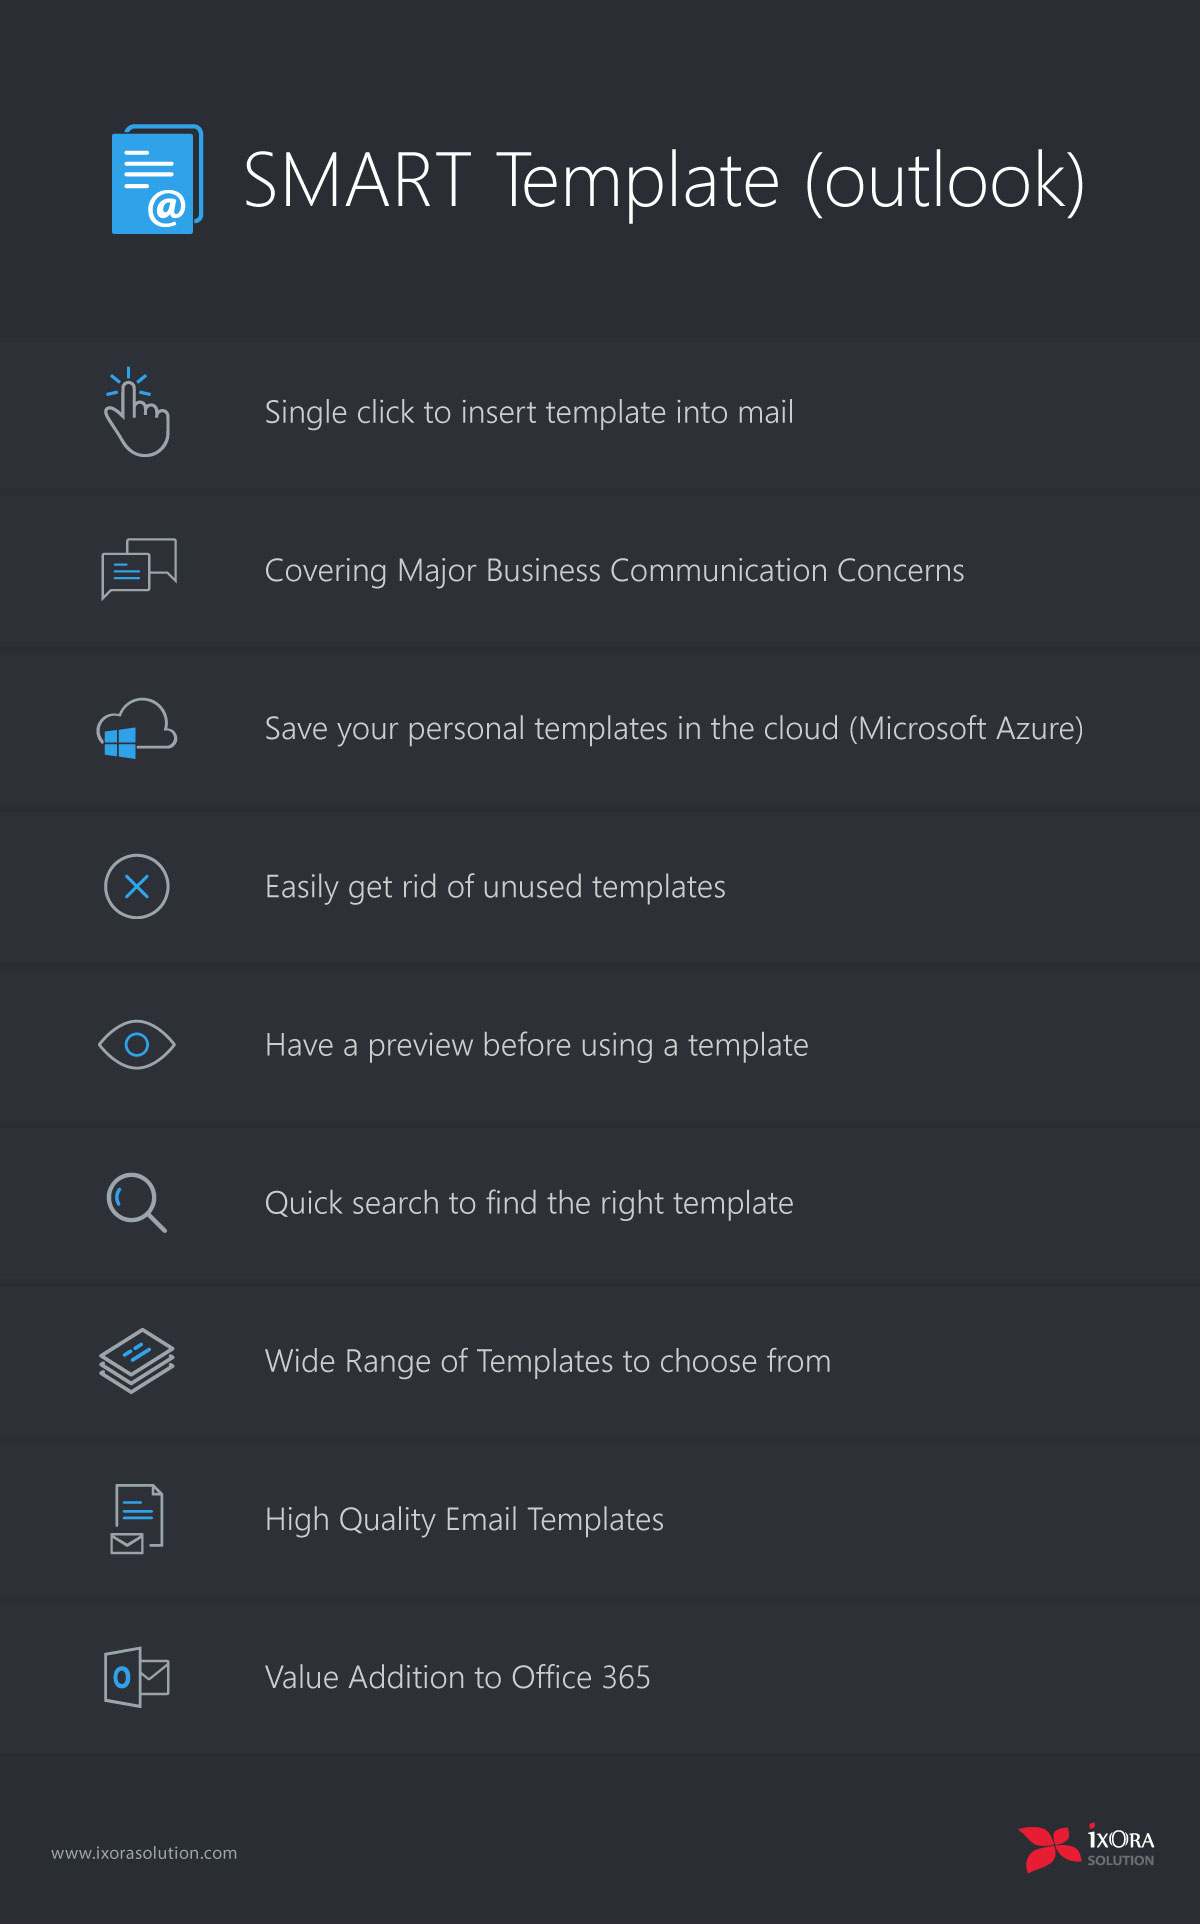 Infographic showing the features of Smart Template Outlook application. 